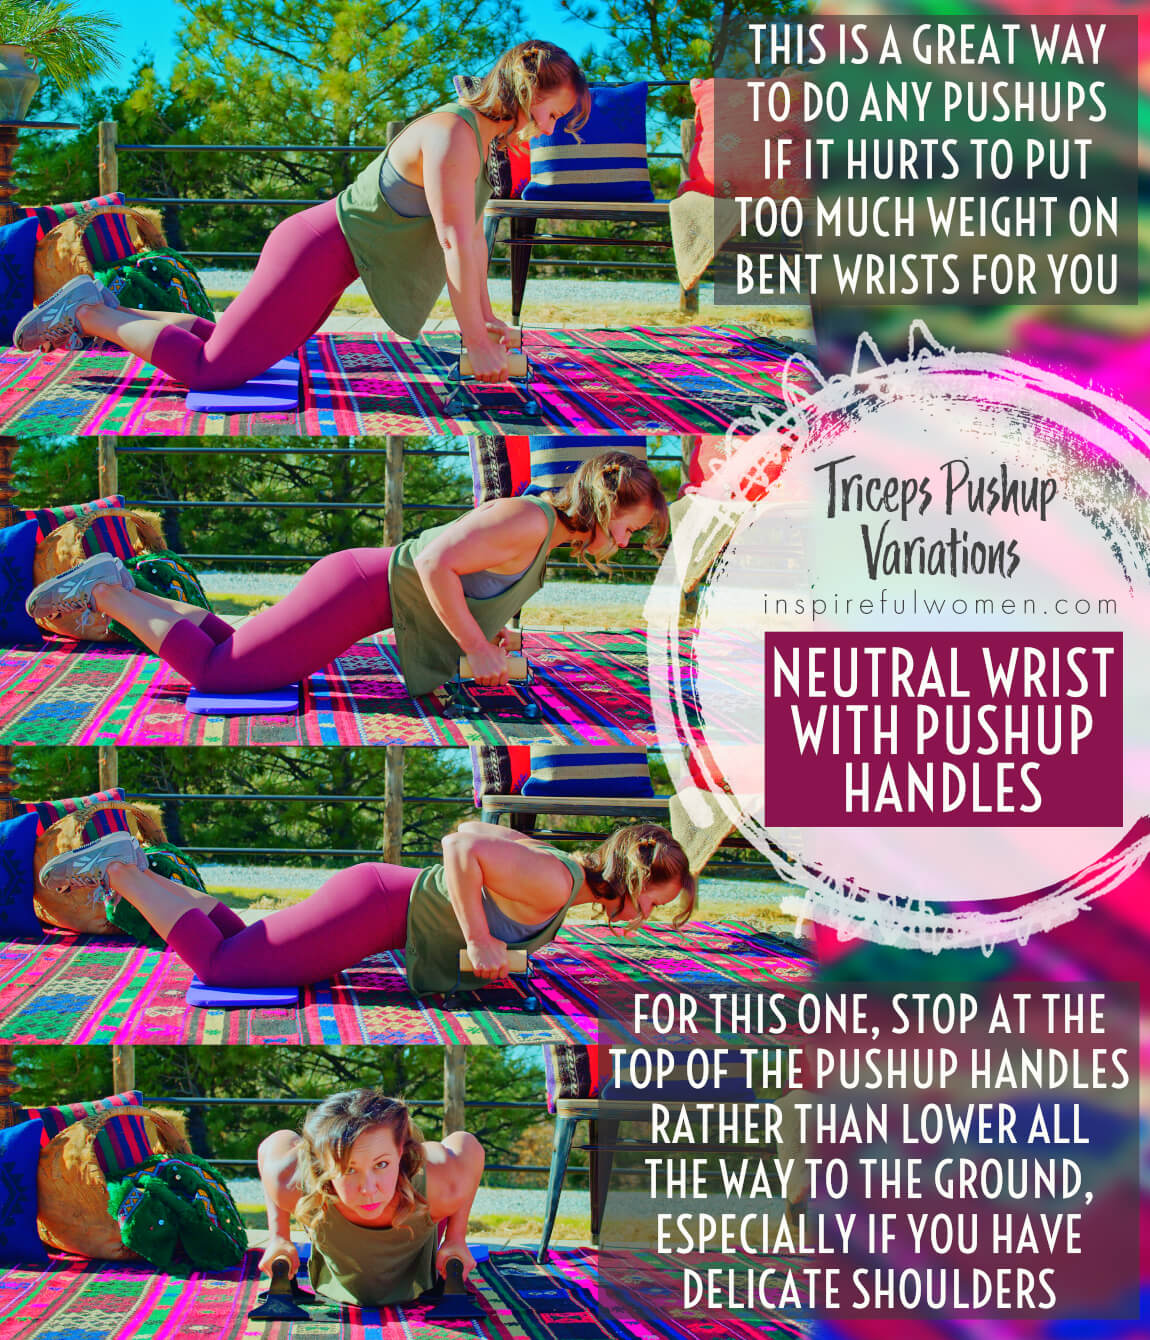 neutral-wrist-with-pushup-handles-triceps-push-ups-from-knees-bodyweight-variation